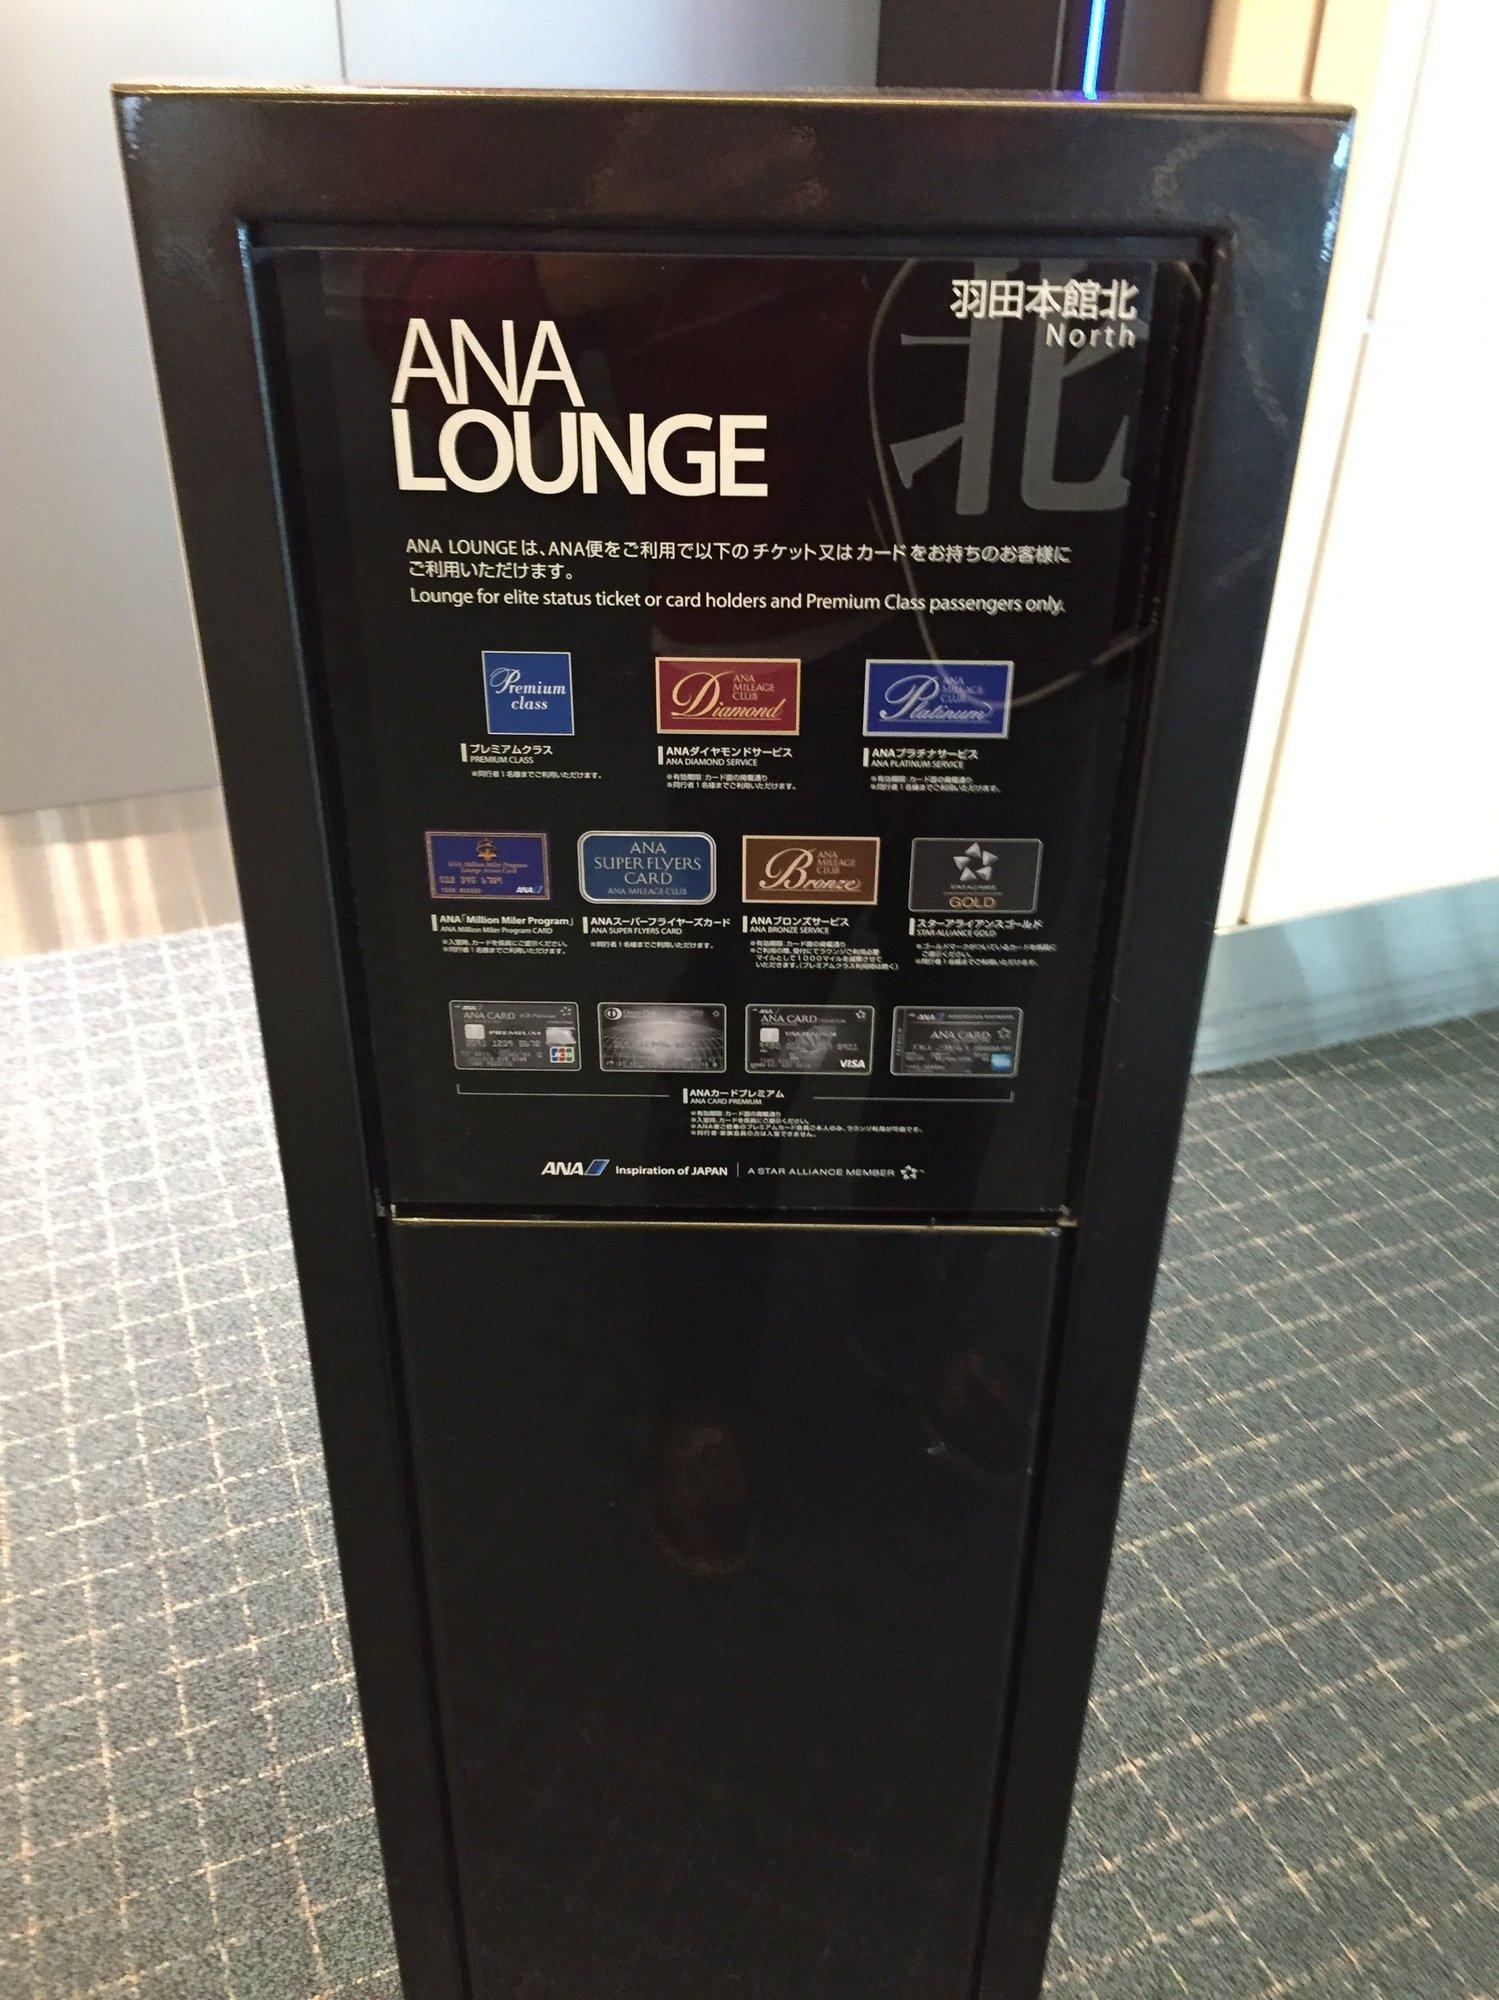 All Nippon Airways ANA Lounge (Gate 60) image 7 of 10